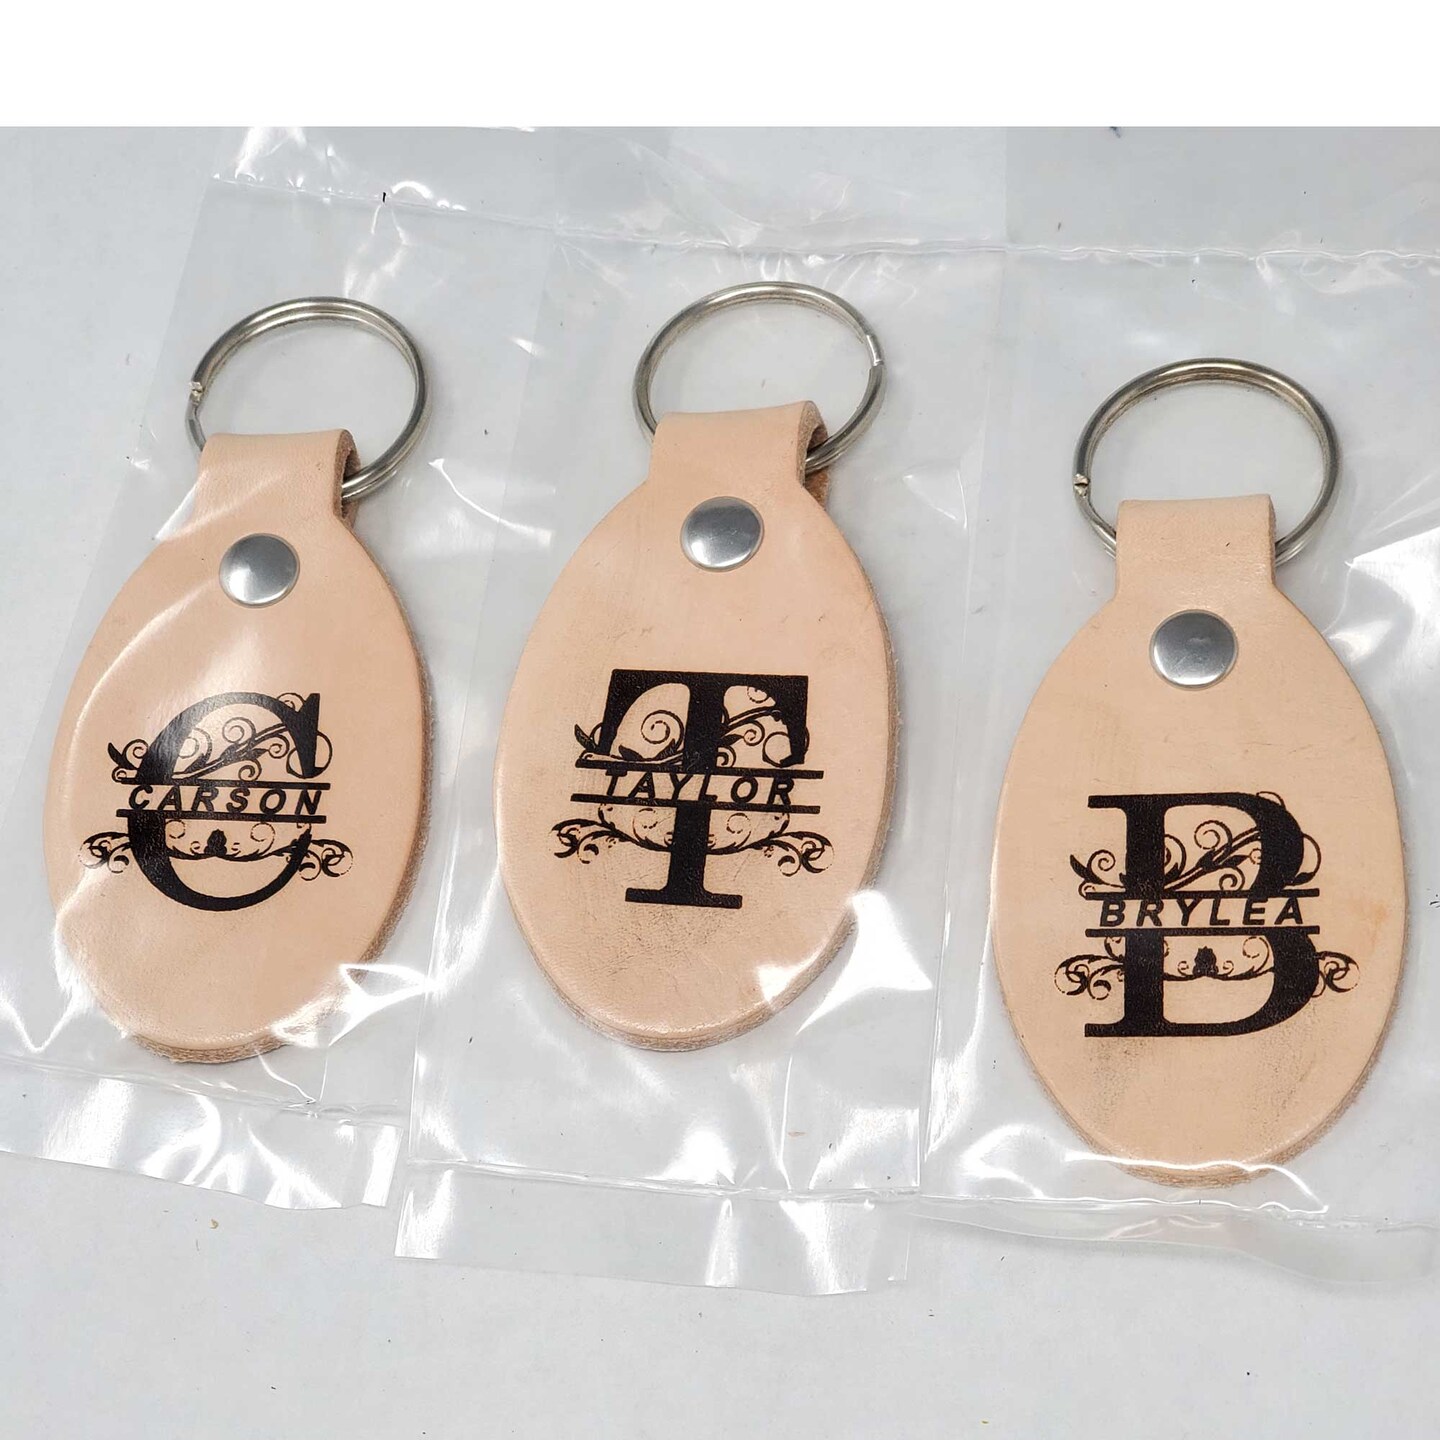 Natural Leather Keychains - 10 Pack Blank Key Fobs Kit - Leather Craft  Projects for All Ages - Tooling, Stamping Engraving Ready